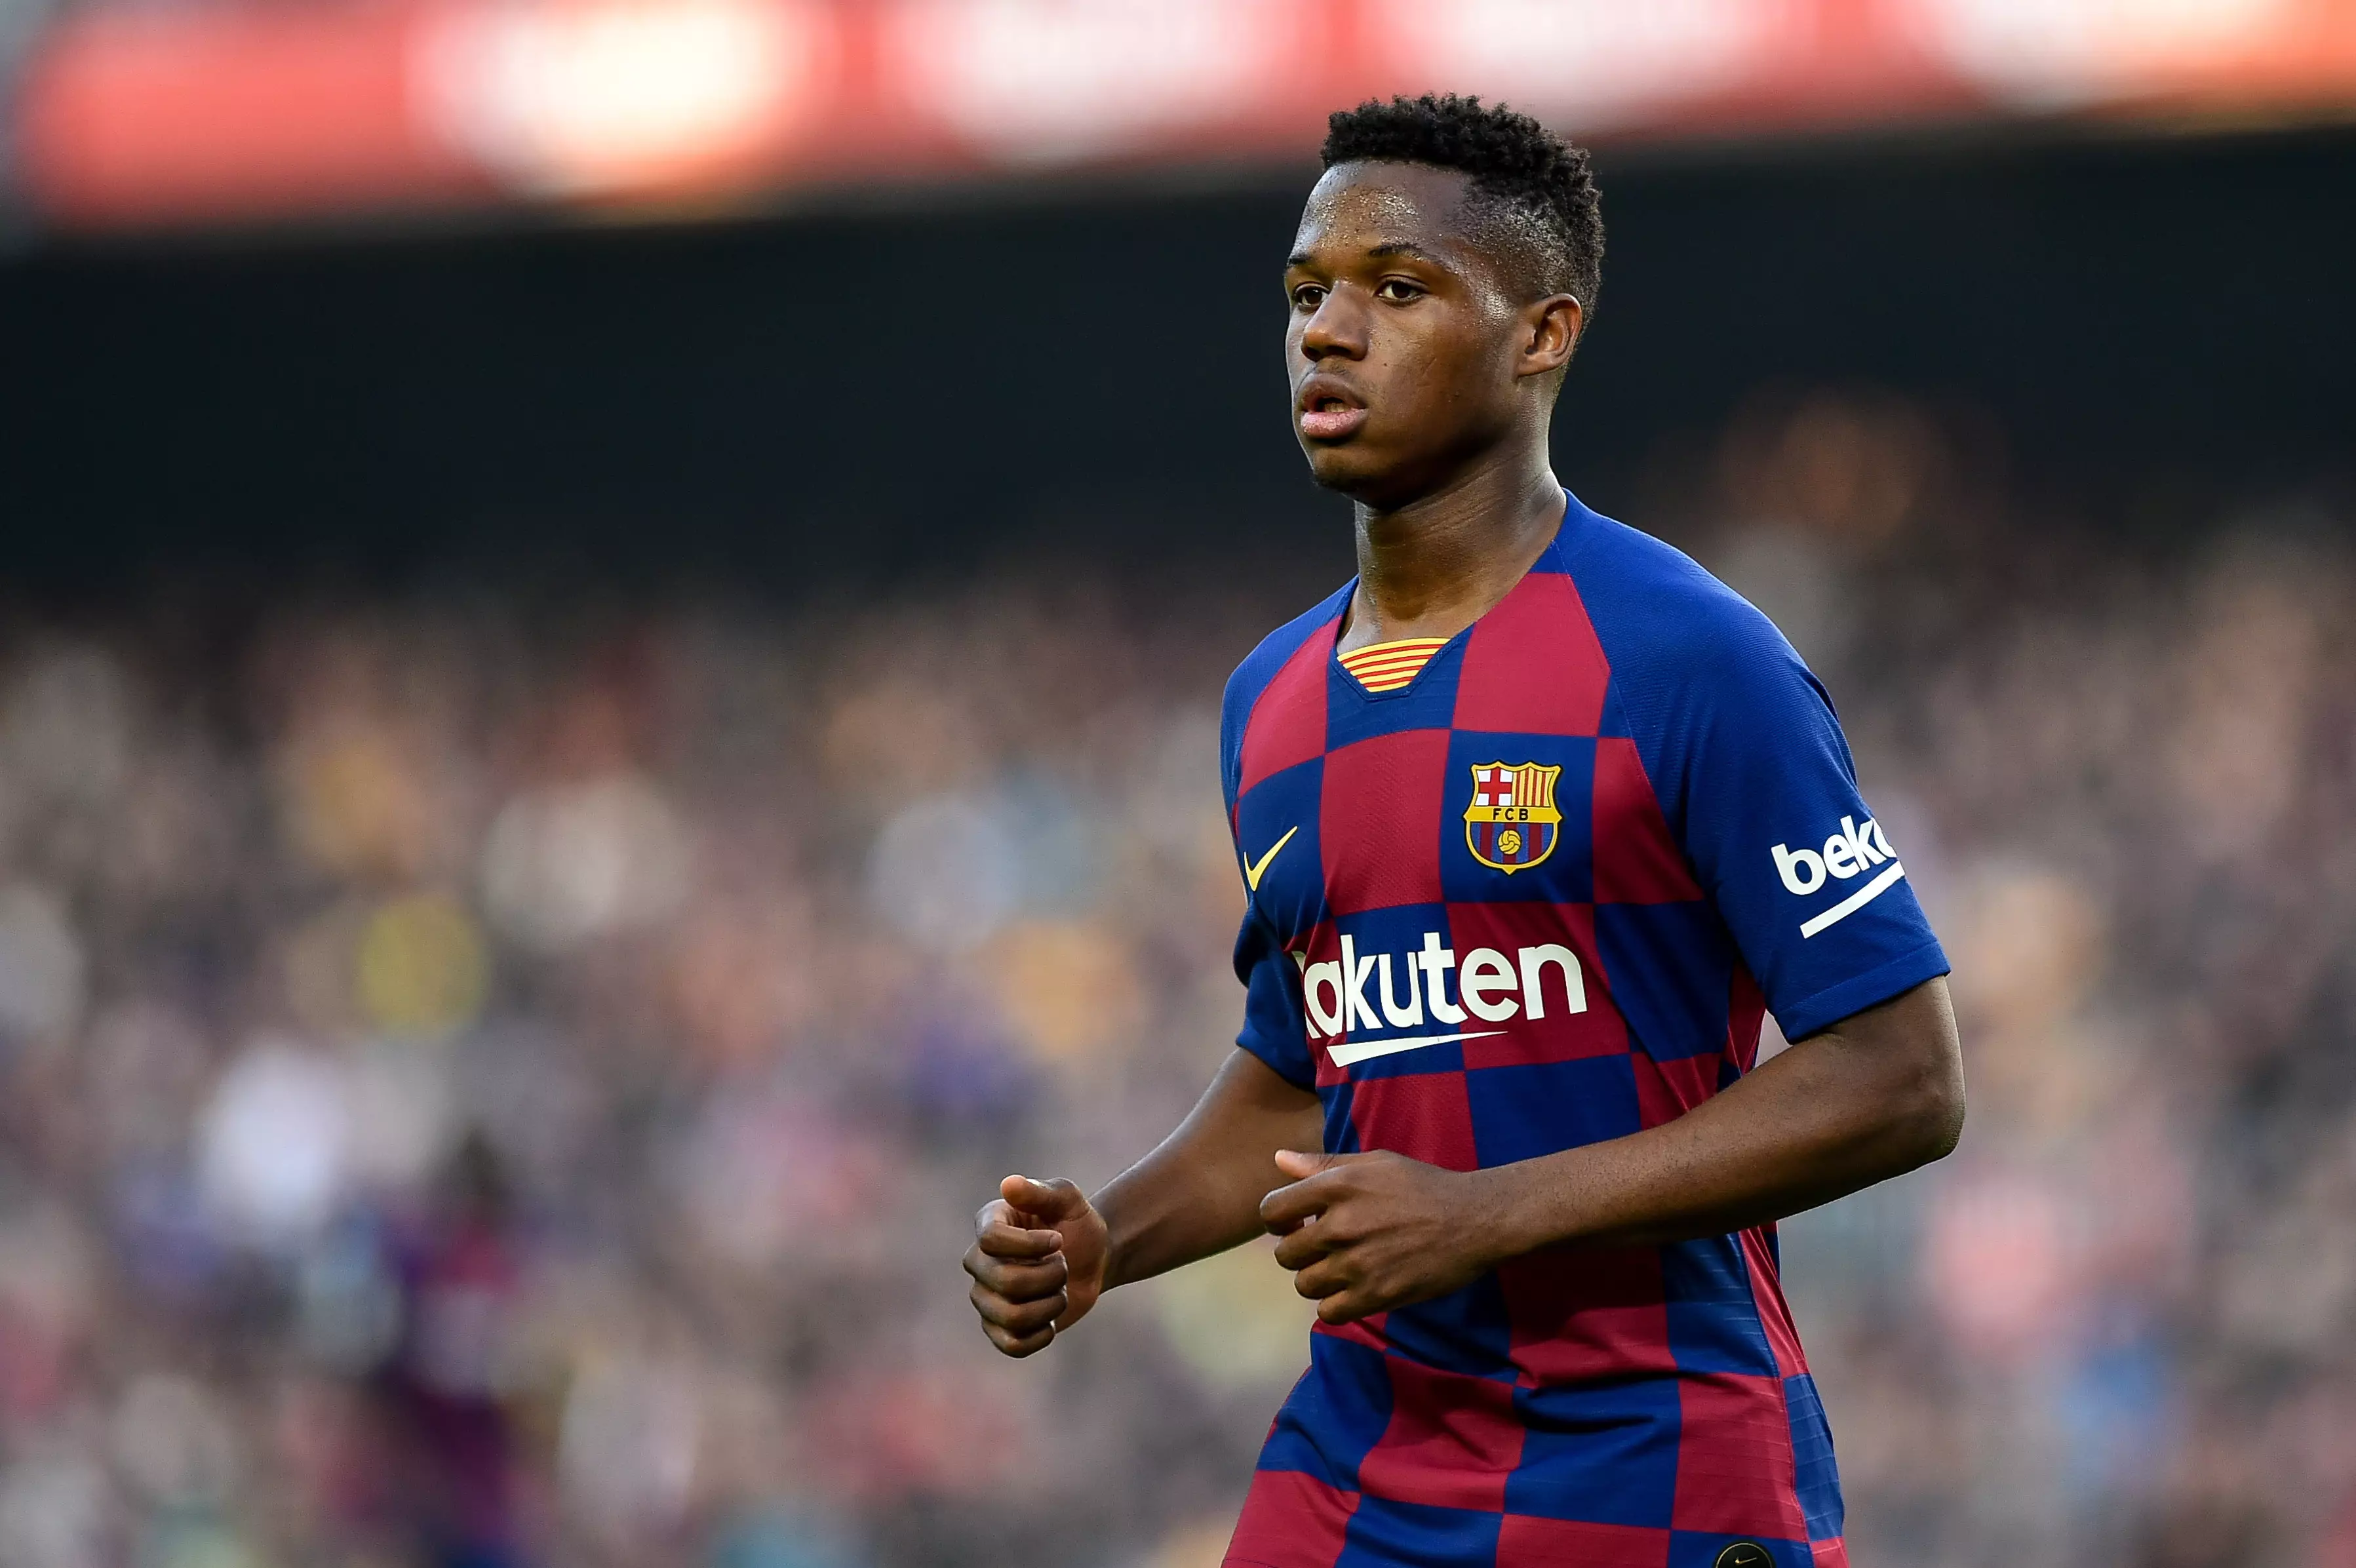 Fati has impressed for Barcelona this season. Image: PA Images